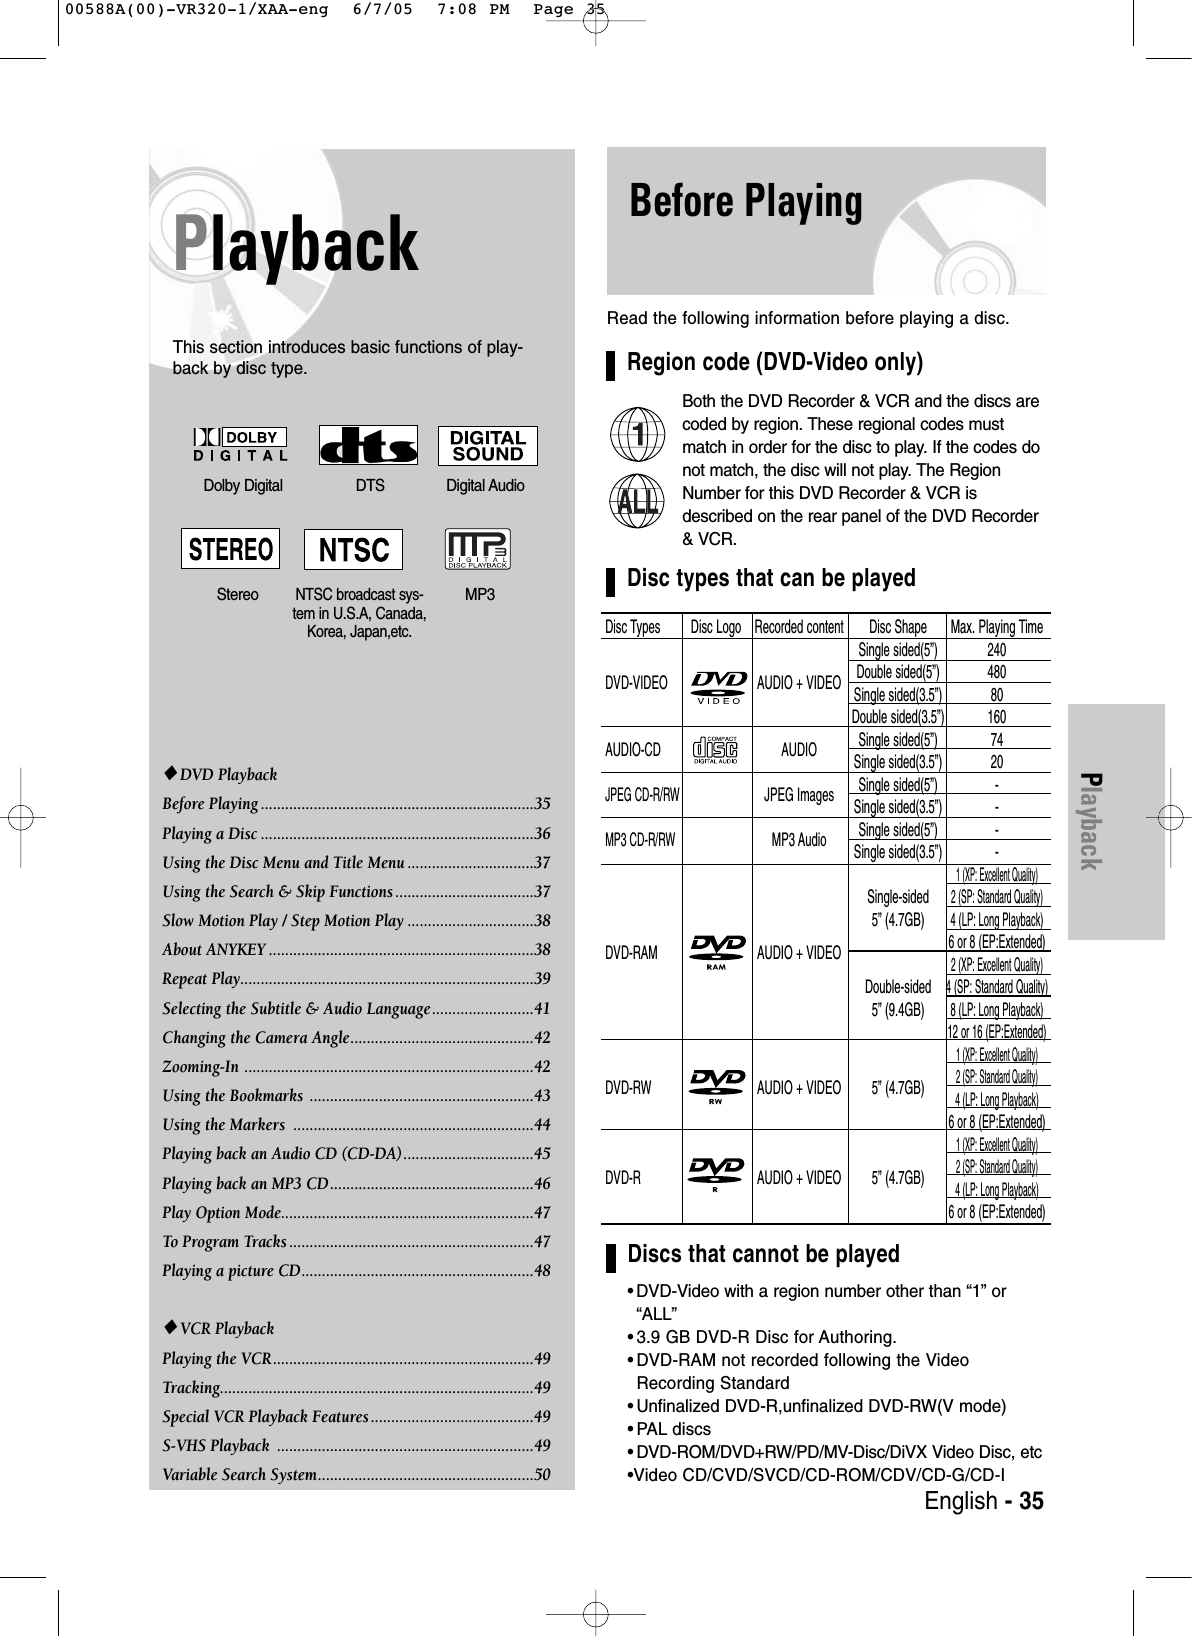 PlaybackPlaybackThis section introduces basic functions of play-back by disc type.Before PlayingRead the following information before playing a disc.Region code (DVD-Video only)Both the DVD Recorder &amp; VCR and the discs arecoded by region. These regional codes mustmatch in order for the disc to play. If the codes donot match, the disc will not play. The RegionNumber for this DVD Recorder &amp; VCR isdescribed on the rear panel of the DVD Recorder&amp; VCR.Disc types that can be playedDiscs that cannot be played•DVD-Video with a region number other than “1” or“ALL”•3.9 GB DVD-R Disc for Authoring.•DVD-RAM not recorded following the VideoRecording Standard•Unfinalized DVD-R,unfinalized DVD-RW(V mode)•PAL discs•DVD-ROM/DVD+RW/PD/MV-Disc/DiVX Video Disc, etc•Video CD/CVD/SVCD/CD-ROM/CDV/CD-G/CD-IDolby Digital DTS Digital AudioStereo MP3NTSC broadcast sys-tem in U.S.A, Canada,Korea, Japan,etc.Disc Types Disc Logo Recorded content Disc Shape Max. Playing TimeSingle sided(5”) 240DVD-VIDEO AUDIO + VIDEO Double sided(5”) 480Single sided(3.5”) 80Double sided(3.5”) 160AUDIO-CD AUDIO Single sided(5”) 74Single sided(3.5”) 20JPEG CD-R/RWJPEG Images Single sided(5”) -Single sided(3.5”) -MP3 CD-R/RWMP3 Audio Single sided(5”) -Single sided(3.5”) -1 (XP: Excellent Quality)Single-sided2 (SP: Standard Quality)5” (4.7GB)4 (LP: Long Playback)DVD-RAM AUDIO + VIDEO6 or 8 (EP:Extended)2 (XP: Excellent Quality)Double-sided4 (SP: Standard Quality)5” (9.4GB)8 (LP: Long Playback)12 or 16 (EP:Extended)1 (XP: Excellent Quality)DVD-RW AUDIO + VIDEO 5” (4.7GB)2 (SP: Standard Quality)4 (LP: Long Playback)6 or 8 (EP:Extended)1 (XP: Excellent Quality)DVD-R AUDIO + VIDEO 5” (4.7GB)2 (SP: Standard Quality)4 (LP: Long Playback)6 or 8 (EP:Extended)◆DVD PlaybackBefore Playing ...................................................................35 Playing a Disc ...................................................................36Using the Disc Menu and Title Menu ...............................37Using the Search &amp; Skip Functions ..................................37Slow Motion Play / Step Motion Play ...............................38About ANYKEY .................................................................38Repeat Play........................................................................39Selecting the Subtitle &amp; Audio Language.........................41 Changing the Camera Angle.............................................42Zooming-In .......................................................................42Using the Bookmarks  .......................................................43Using the Markers  ...........................................................44Playing back an Audio CD (CD-DA)................................45Playing back an MP3 CD..................................................46Play Option Mode..............................................................47To   Program Tracks ............................................................47Playing a picture CD.........................................................48◆VCR PlaybackPlaying the VCR................................................................49Tracking.............................................................................49Special VCR Playback Features ........................................49S-VHS Playback  ...............................................................49Variable Search System.....................................................50English - 3500588A(00)-VR320-1/XAA-eng  6/7/05  7:08 PM  Page 35